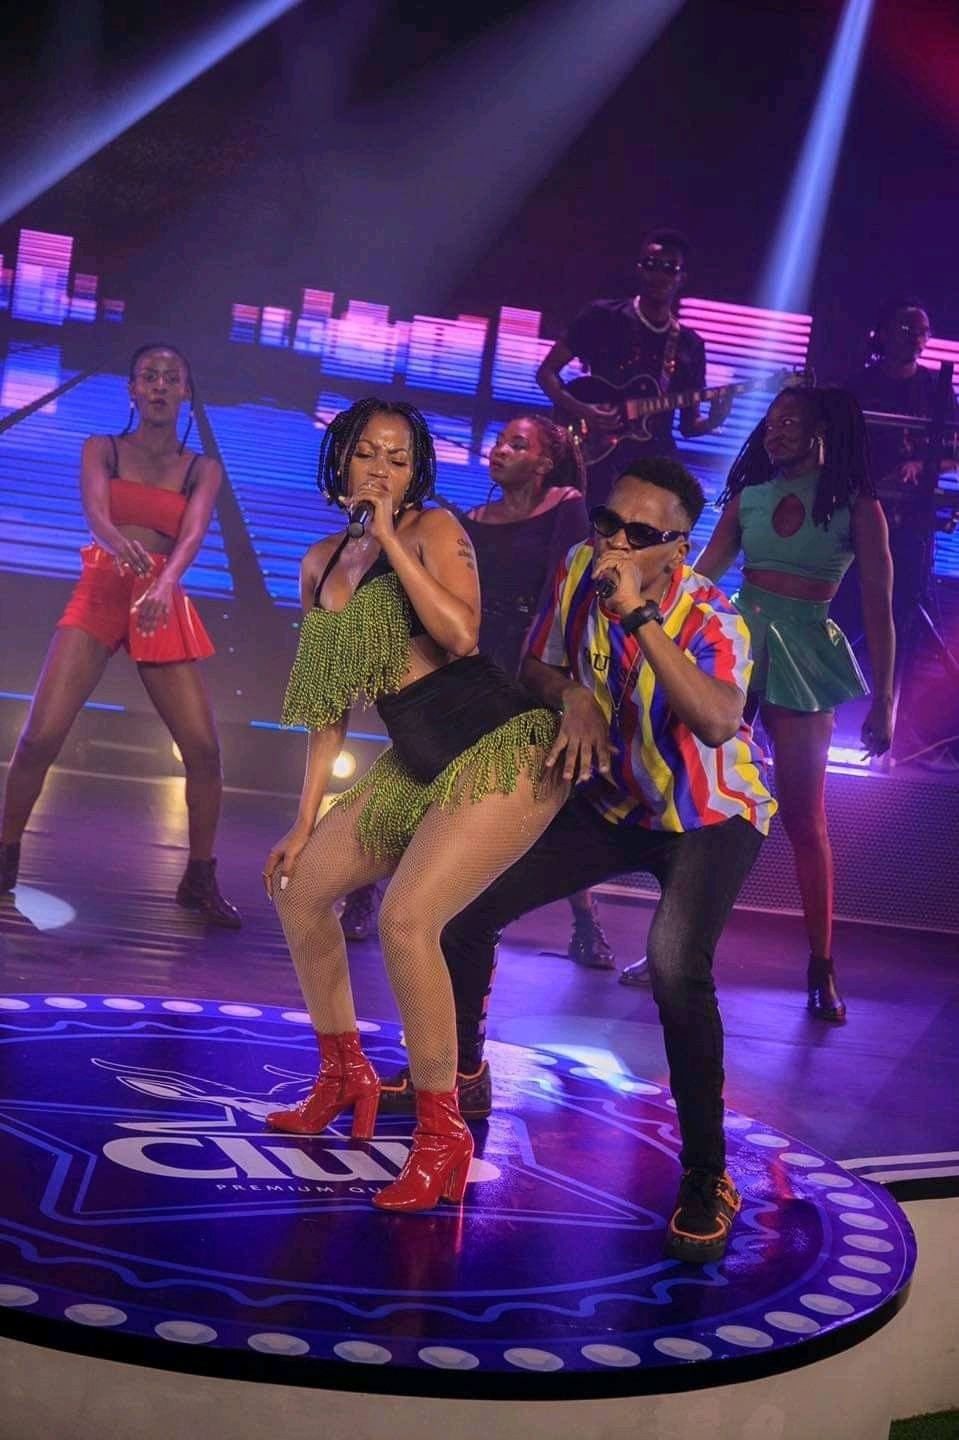 Sheebah and Panda on Stage during an online concert sponsored by club beer 